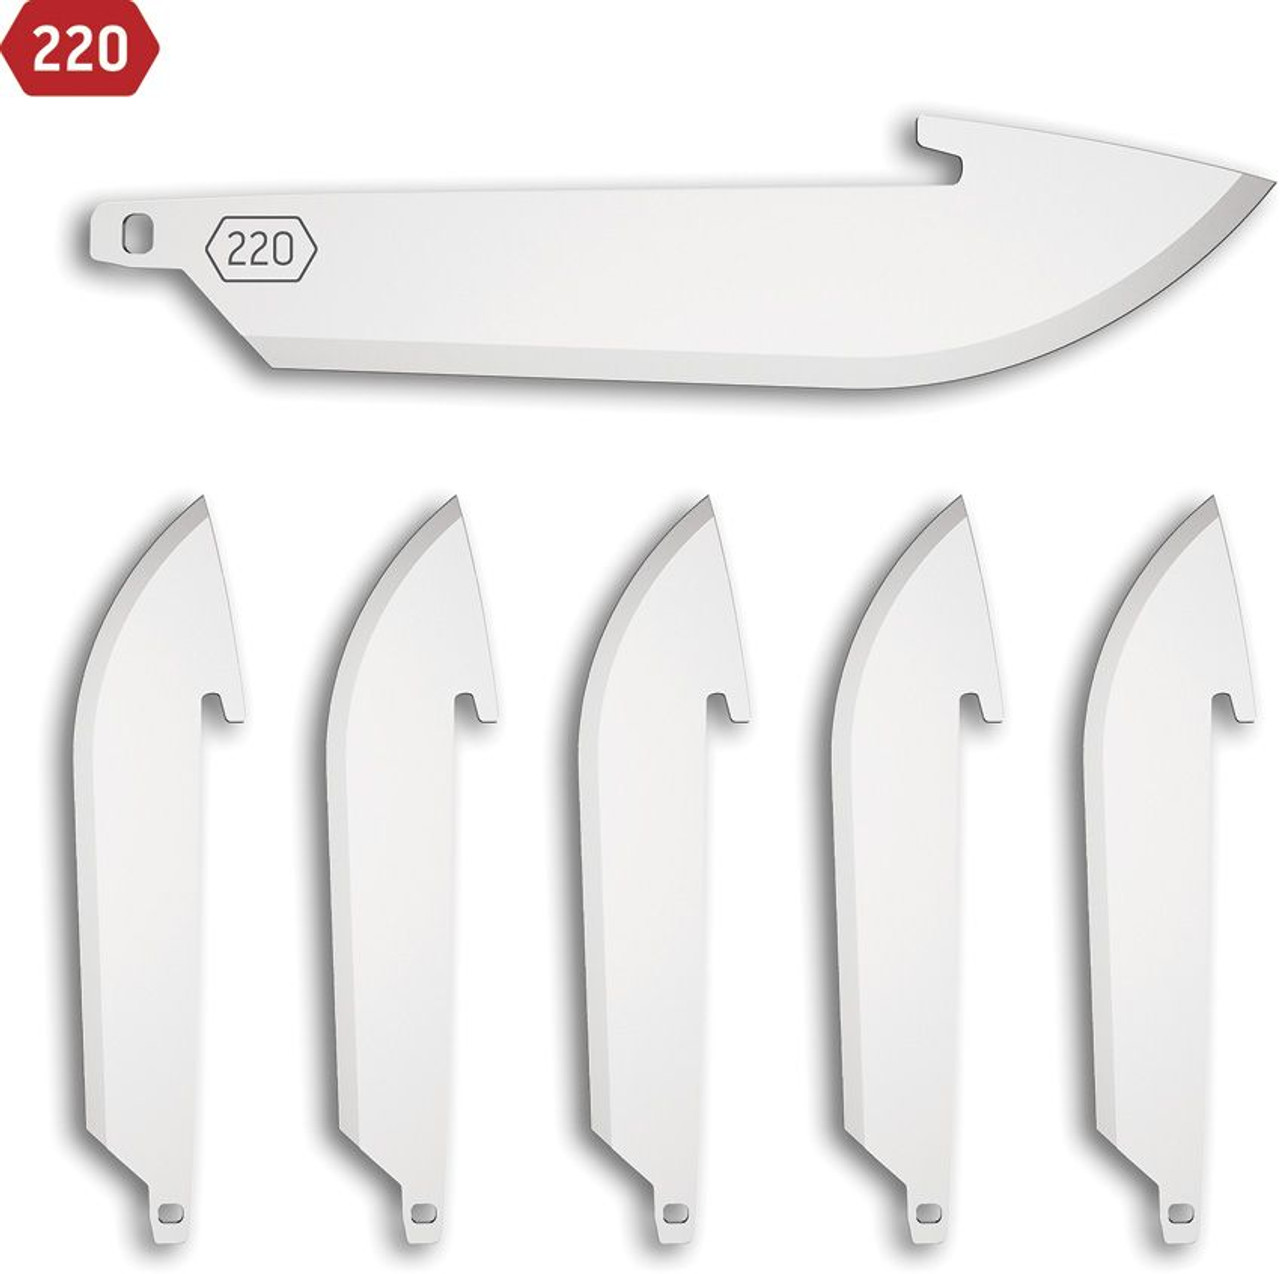 Outdoor Edge Replacement Blades (6 PK) 2.2" 420J2 Satin Japanese Stainless Steel Replacement Blades -220